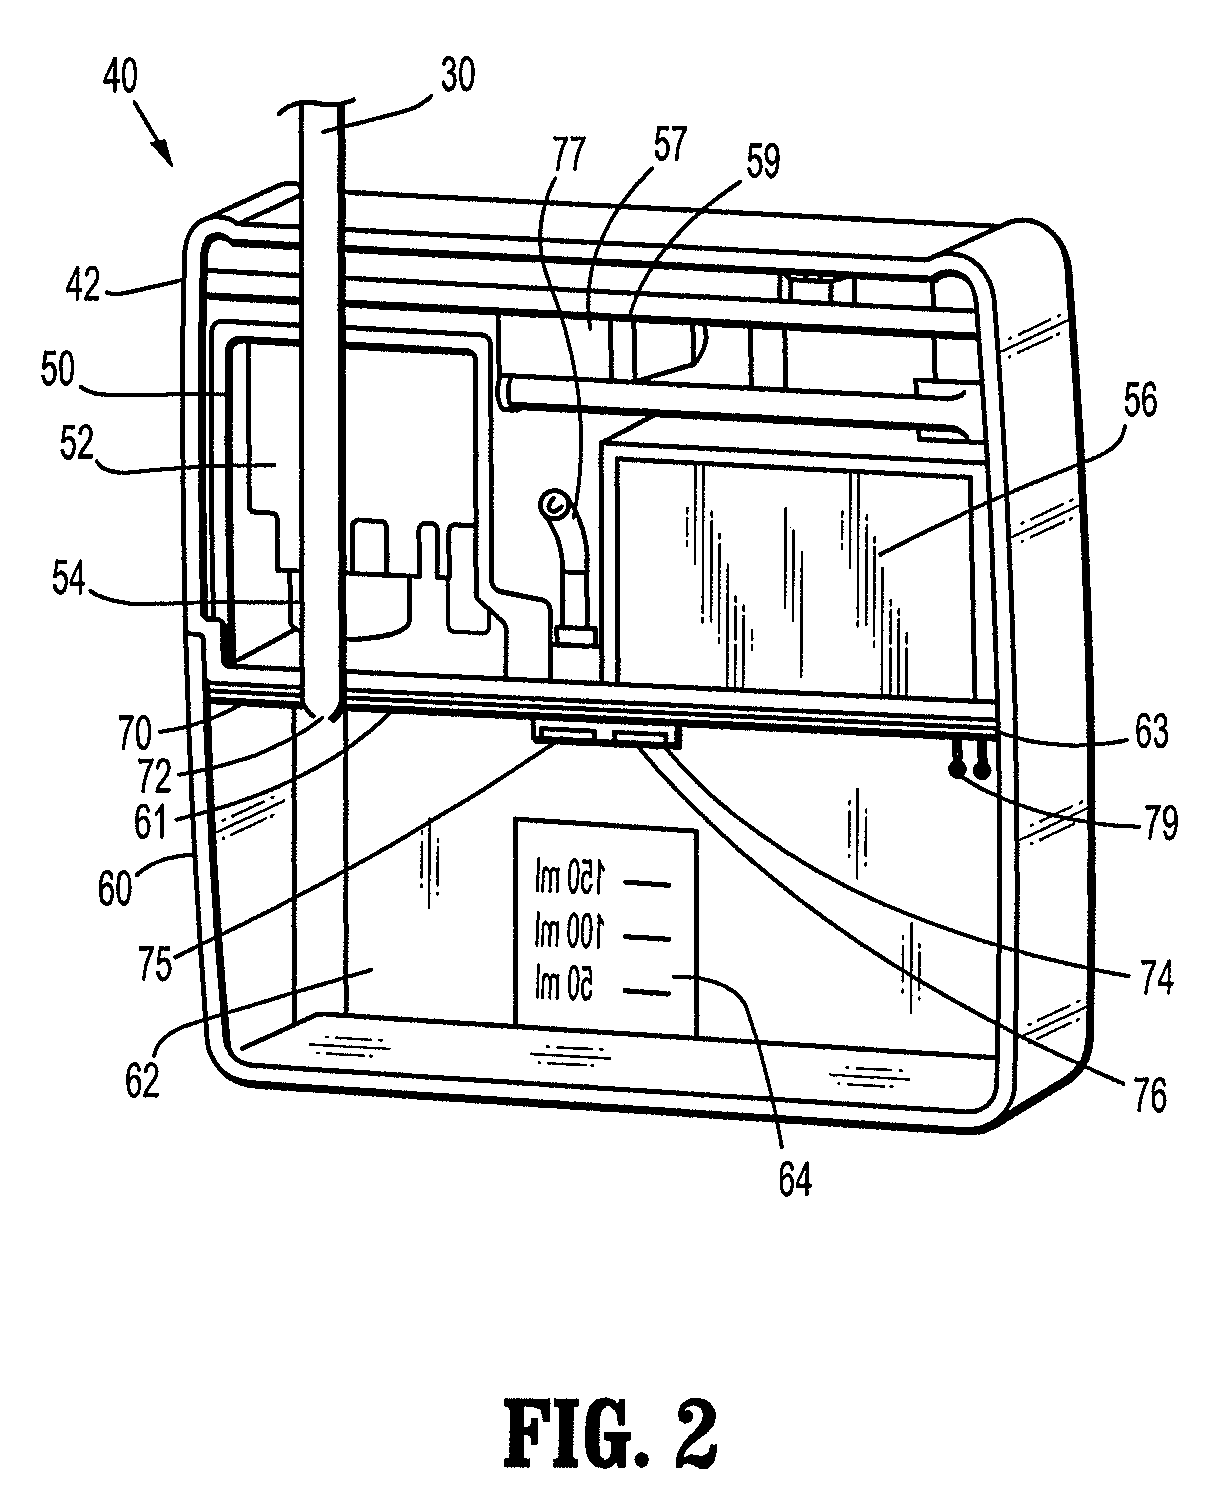 Canister for receiving wound exudate in a negative pressure therapy system